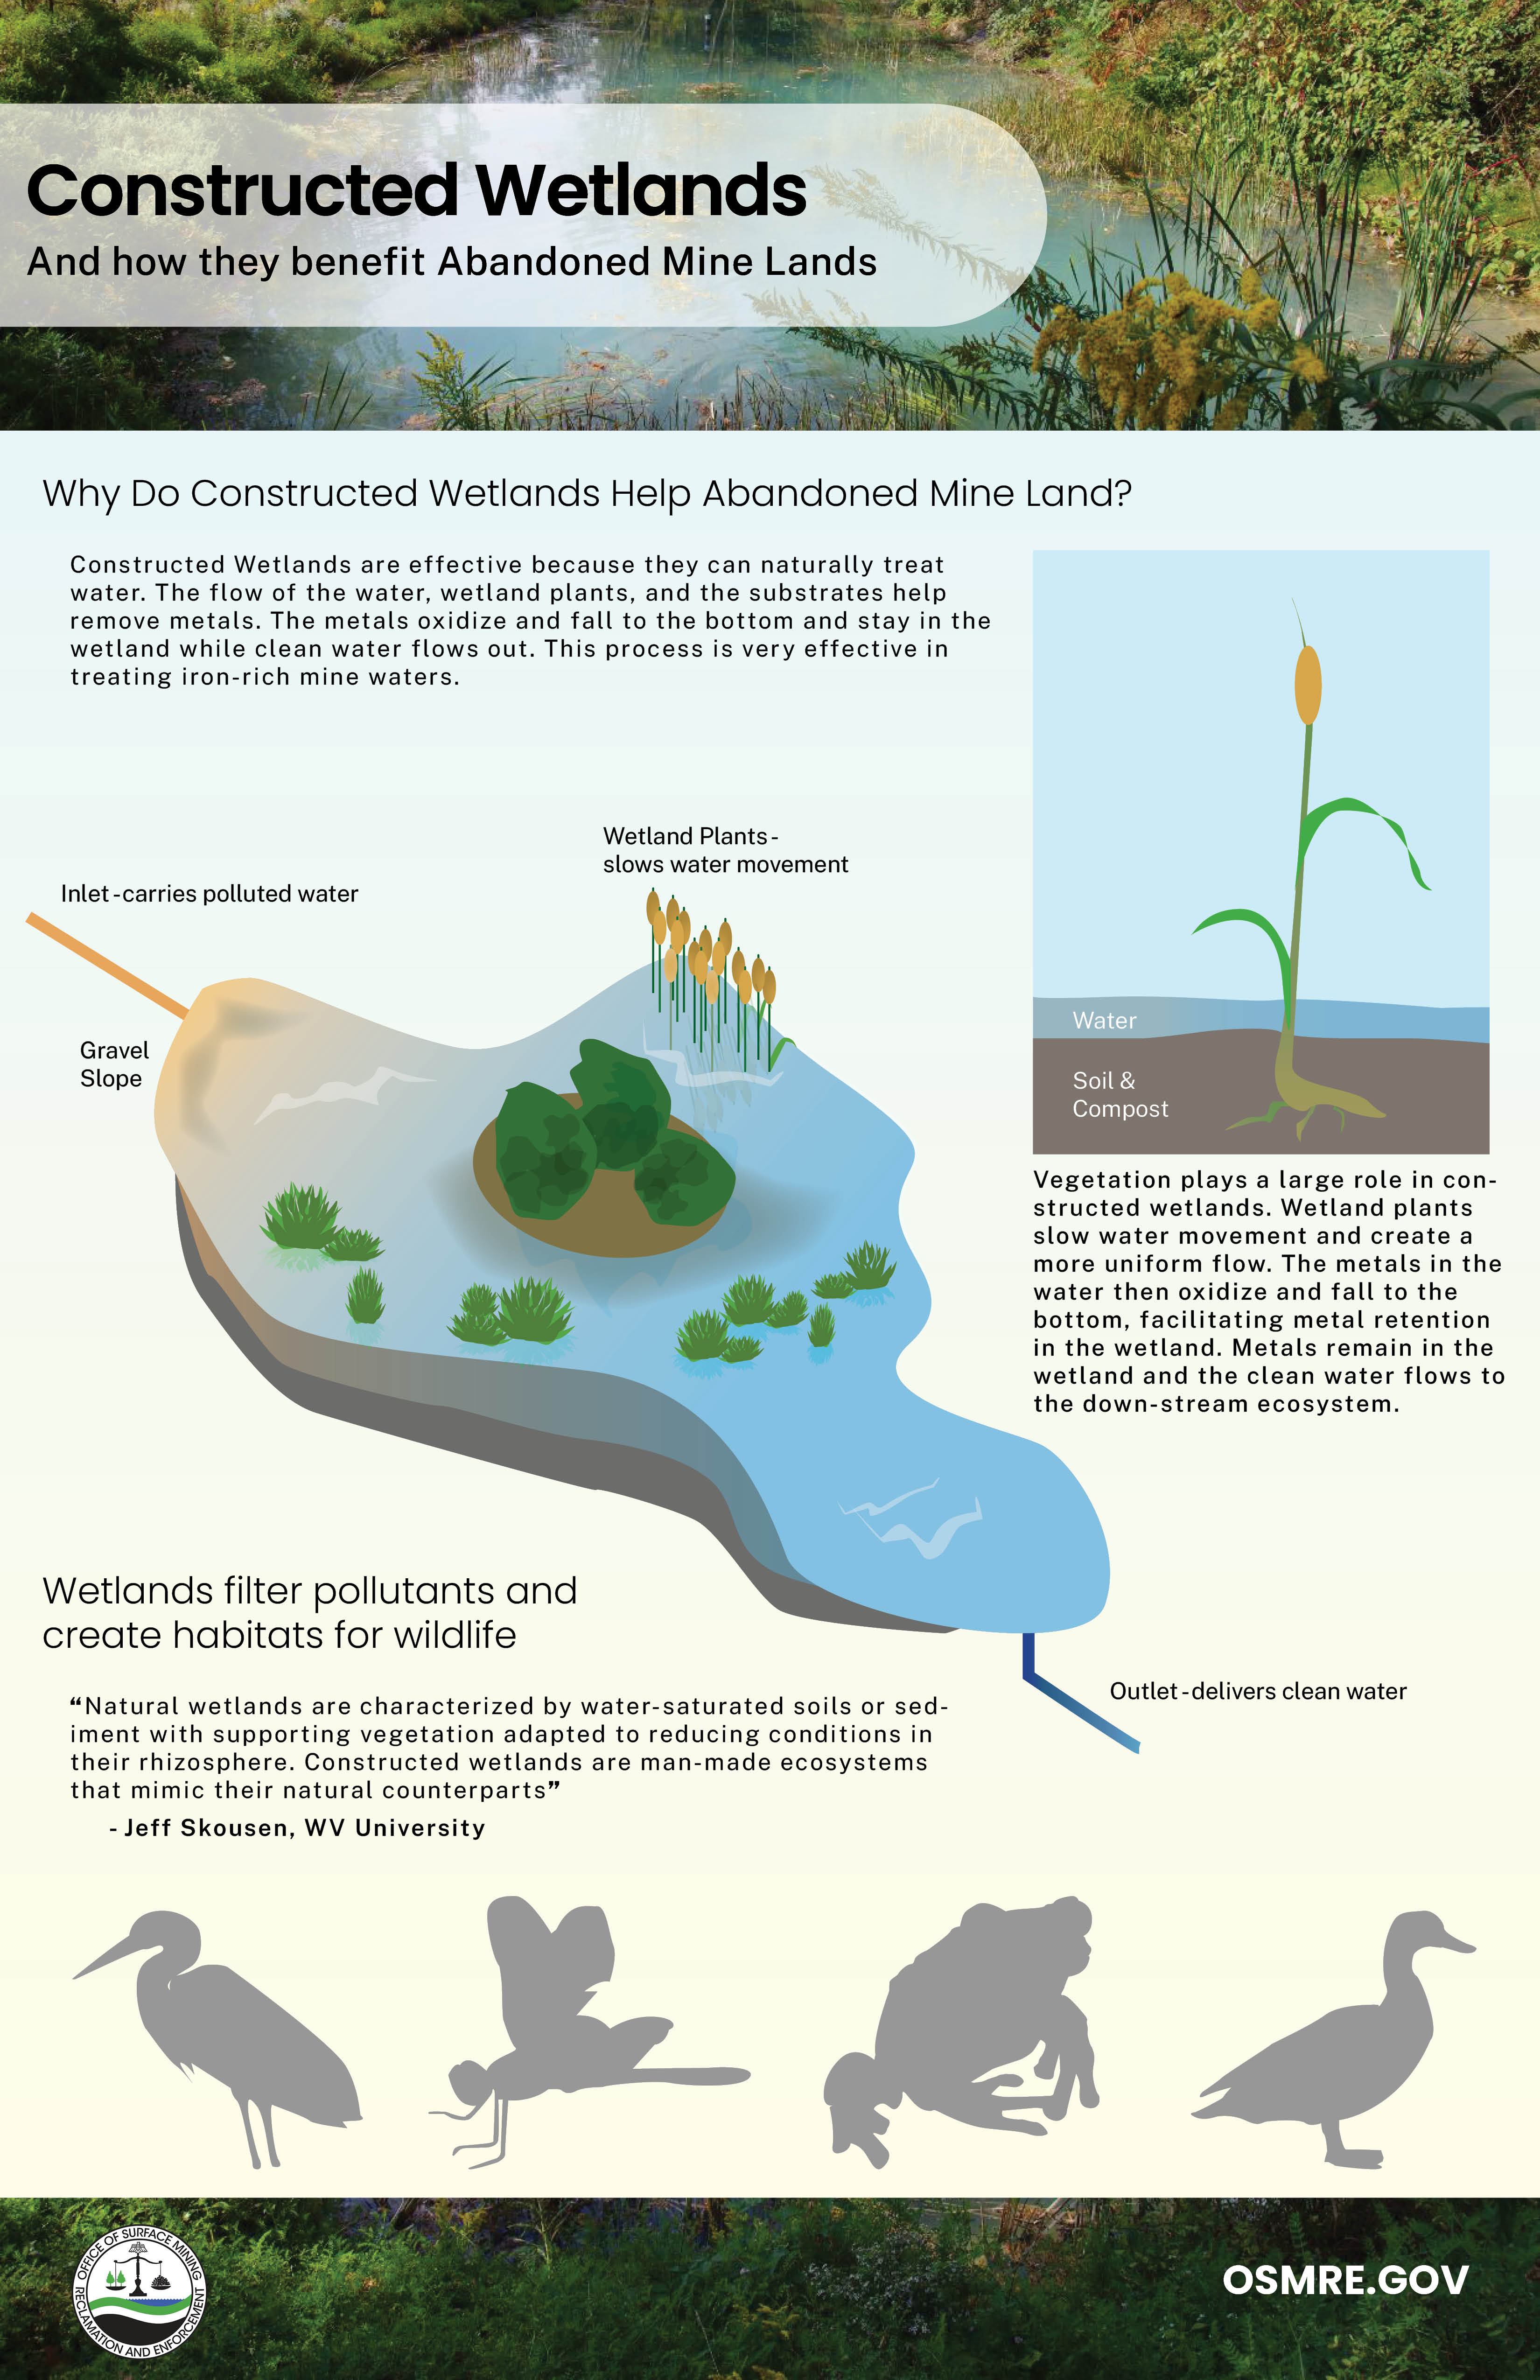 Mine drainage infographic, showing inlet carrying polluted water through wetland filtration to release clean water through outlet to downstream ecosystem.